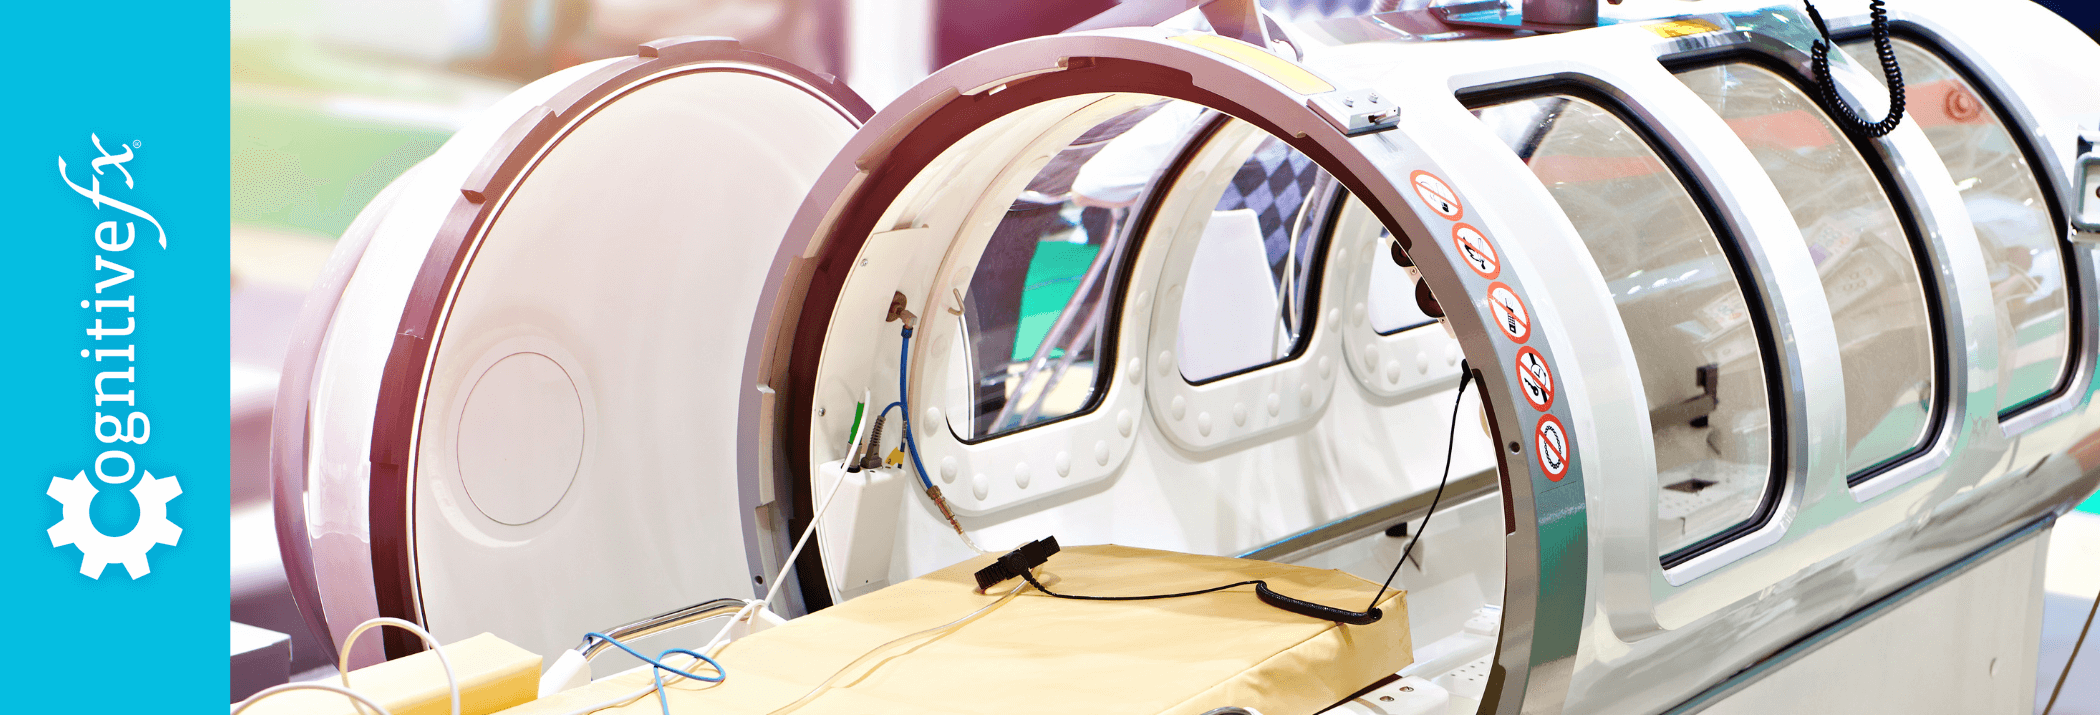 Can Hyperbaric Oxygen Treatment Help with Brain Injury Recovery?